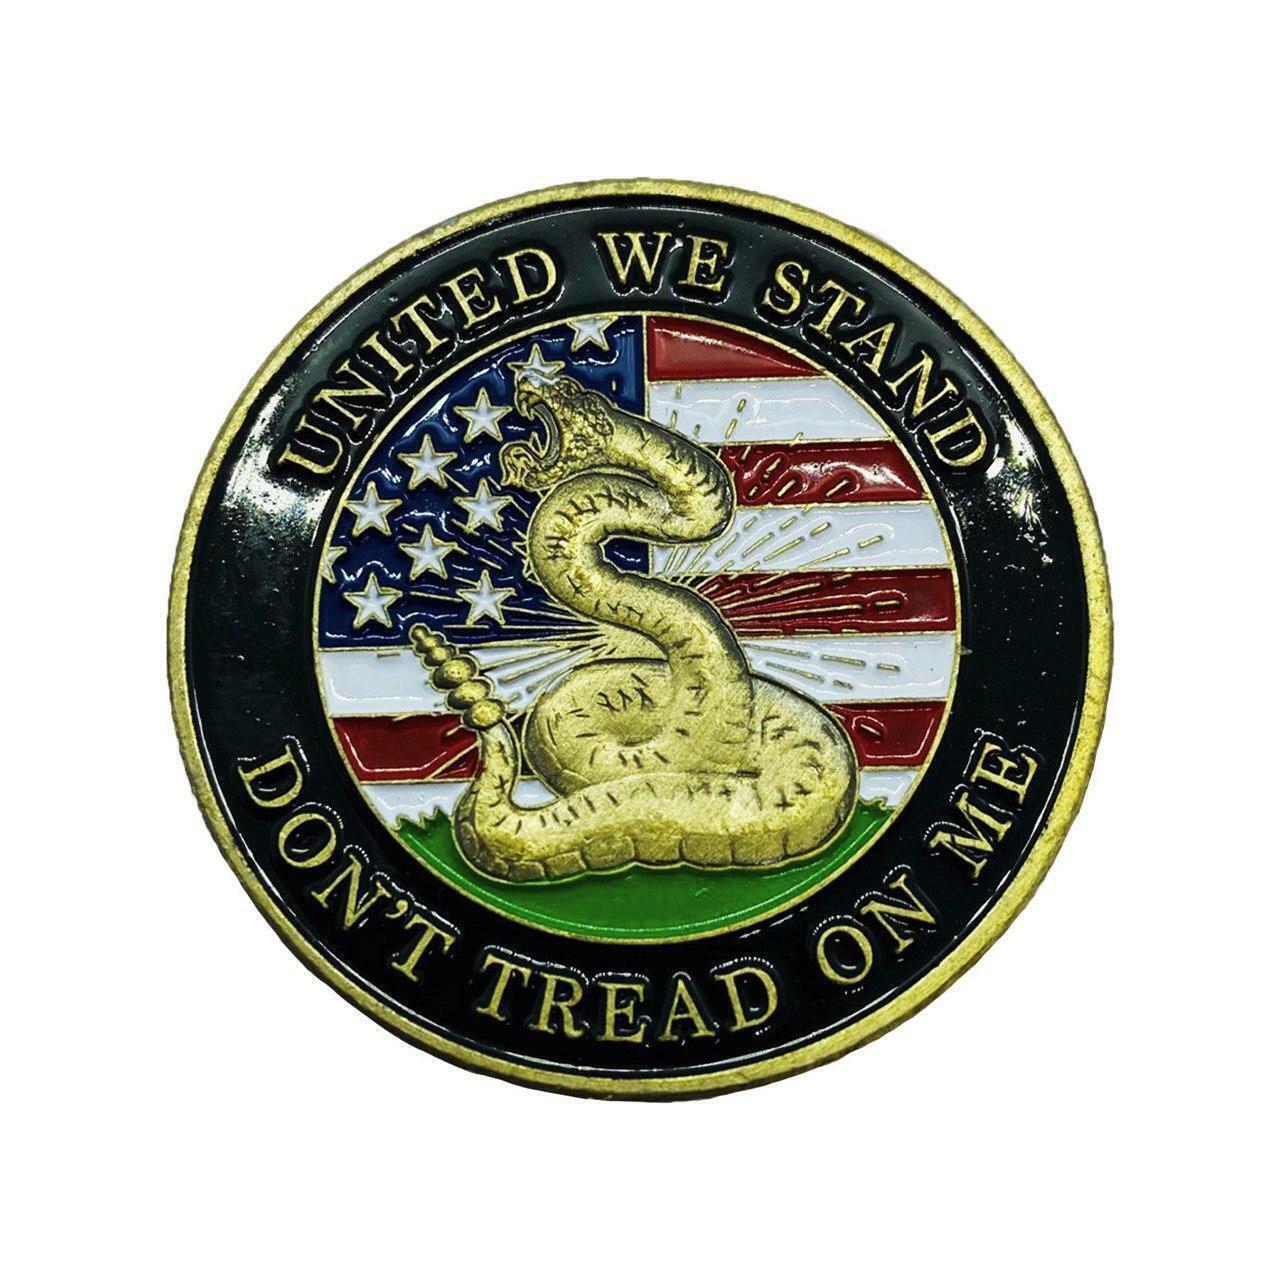 Don't Tread on Me Challenge Coin - Collectible coin. 2nd amendment